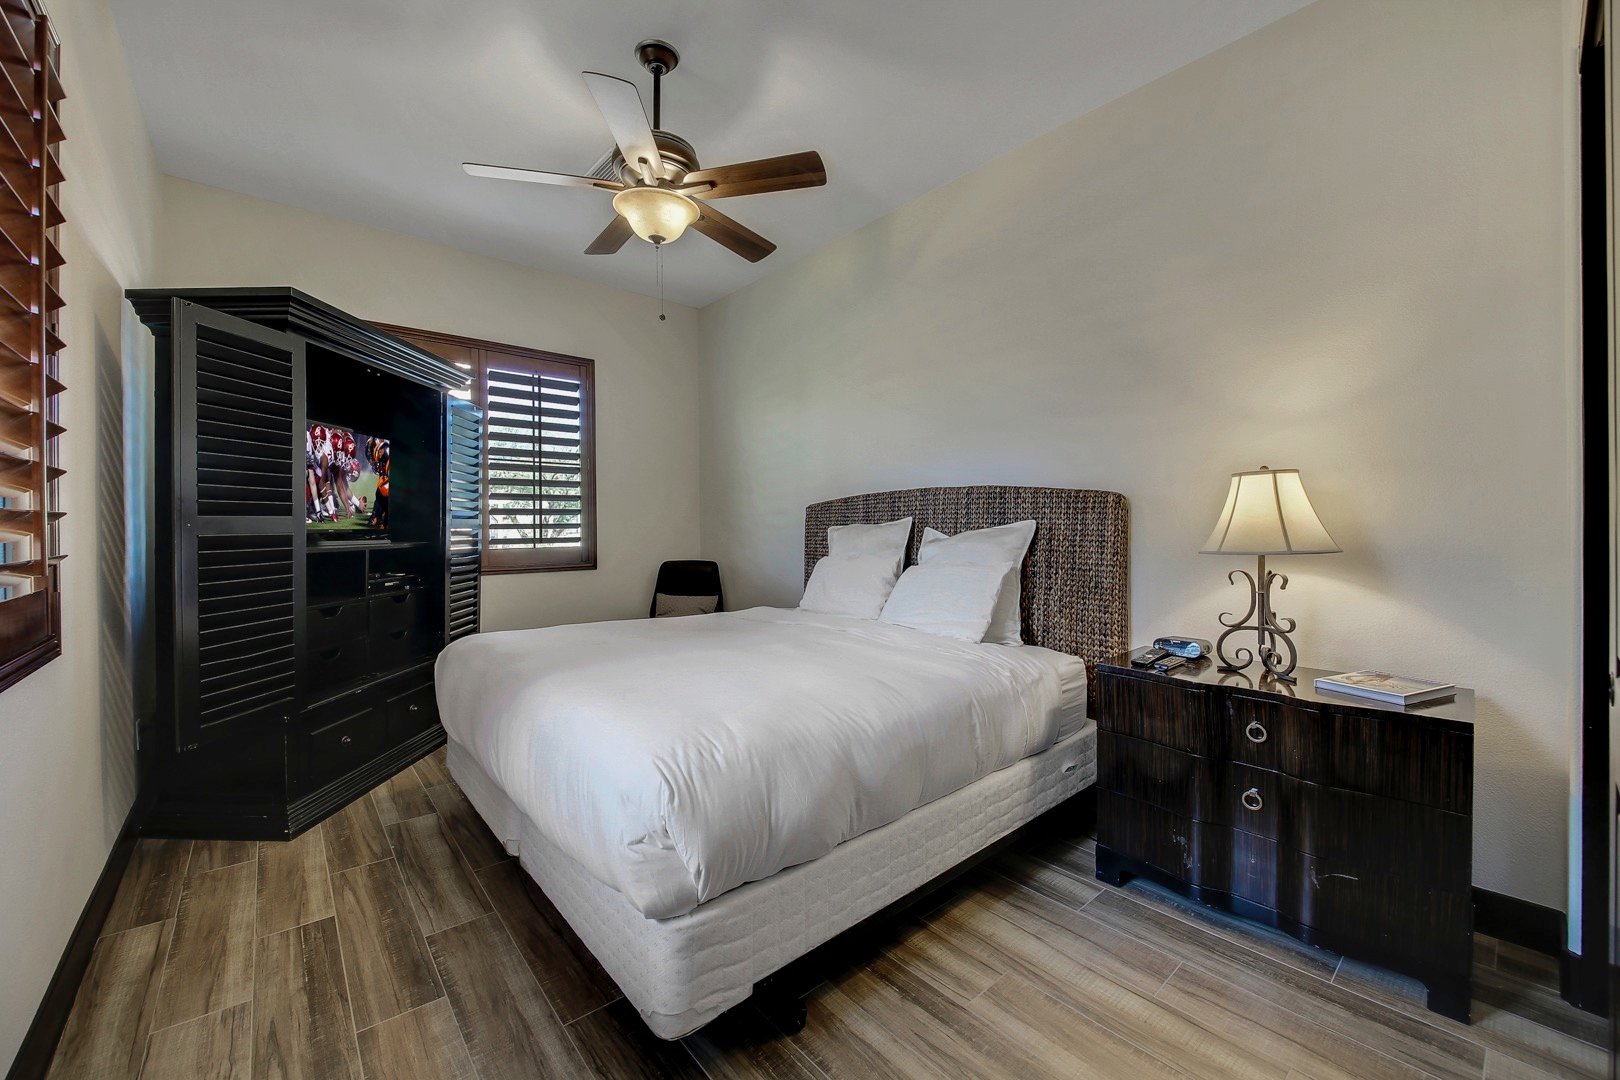 Casita Suite 2 is accessible through the front courtyard and features a King-sized bed.